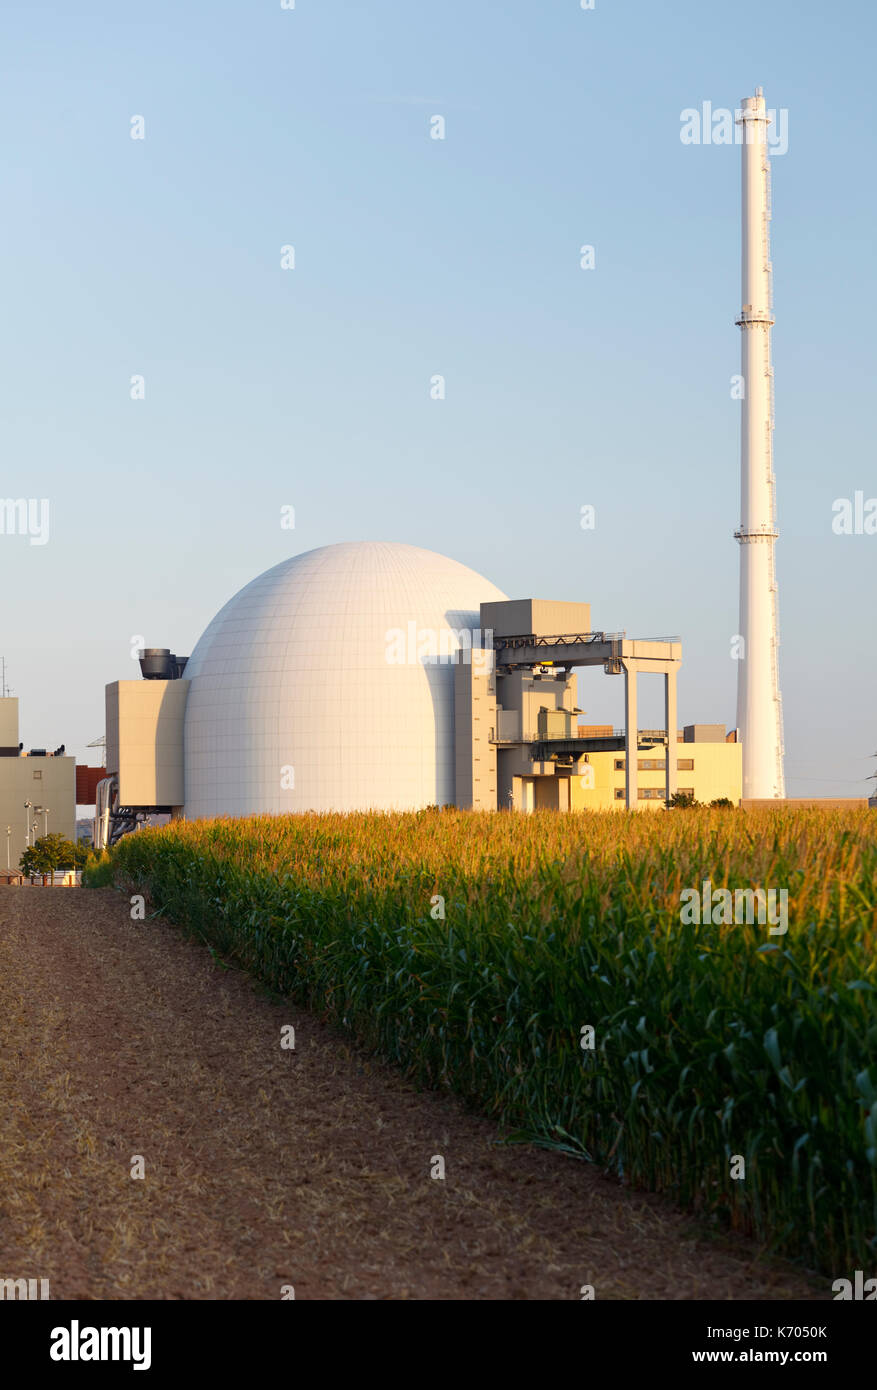 Reactor building of a nuclear power station, a corn field in the foreground. Stock Photo